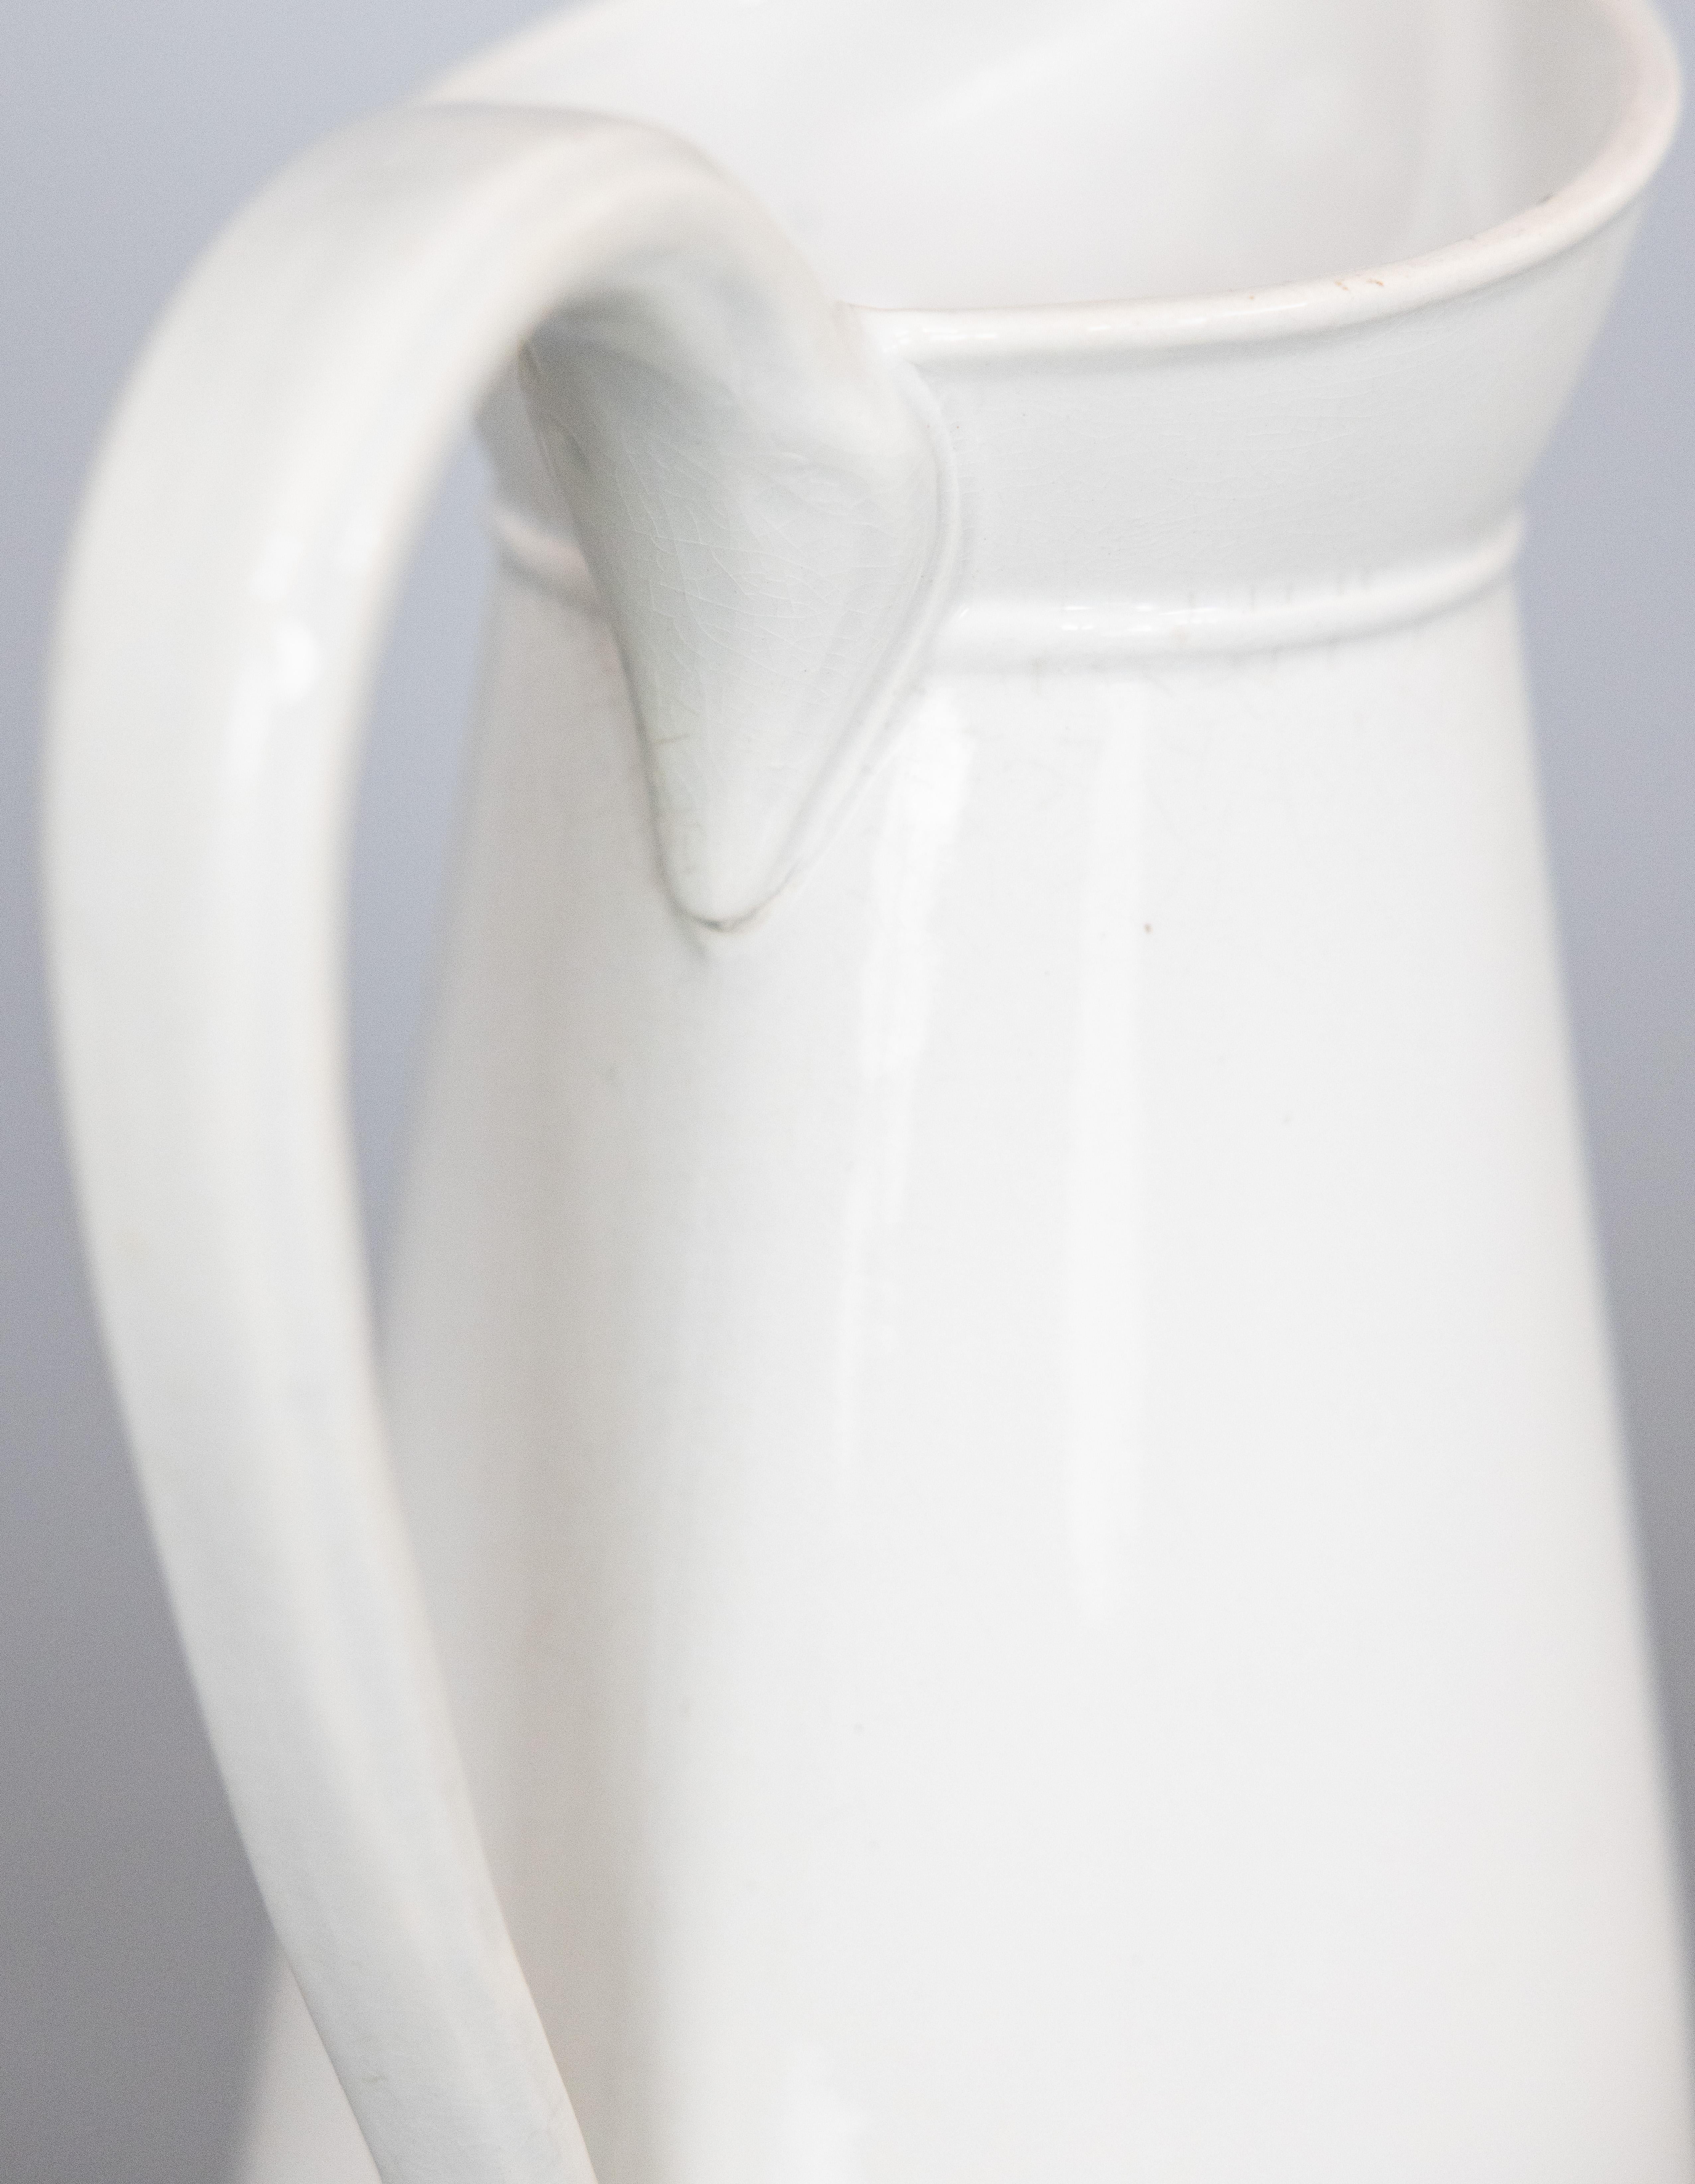 Large Antique French Choisy Le Roi White Ironstone Pitcher, circa 1880 For Sale 3